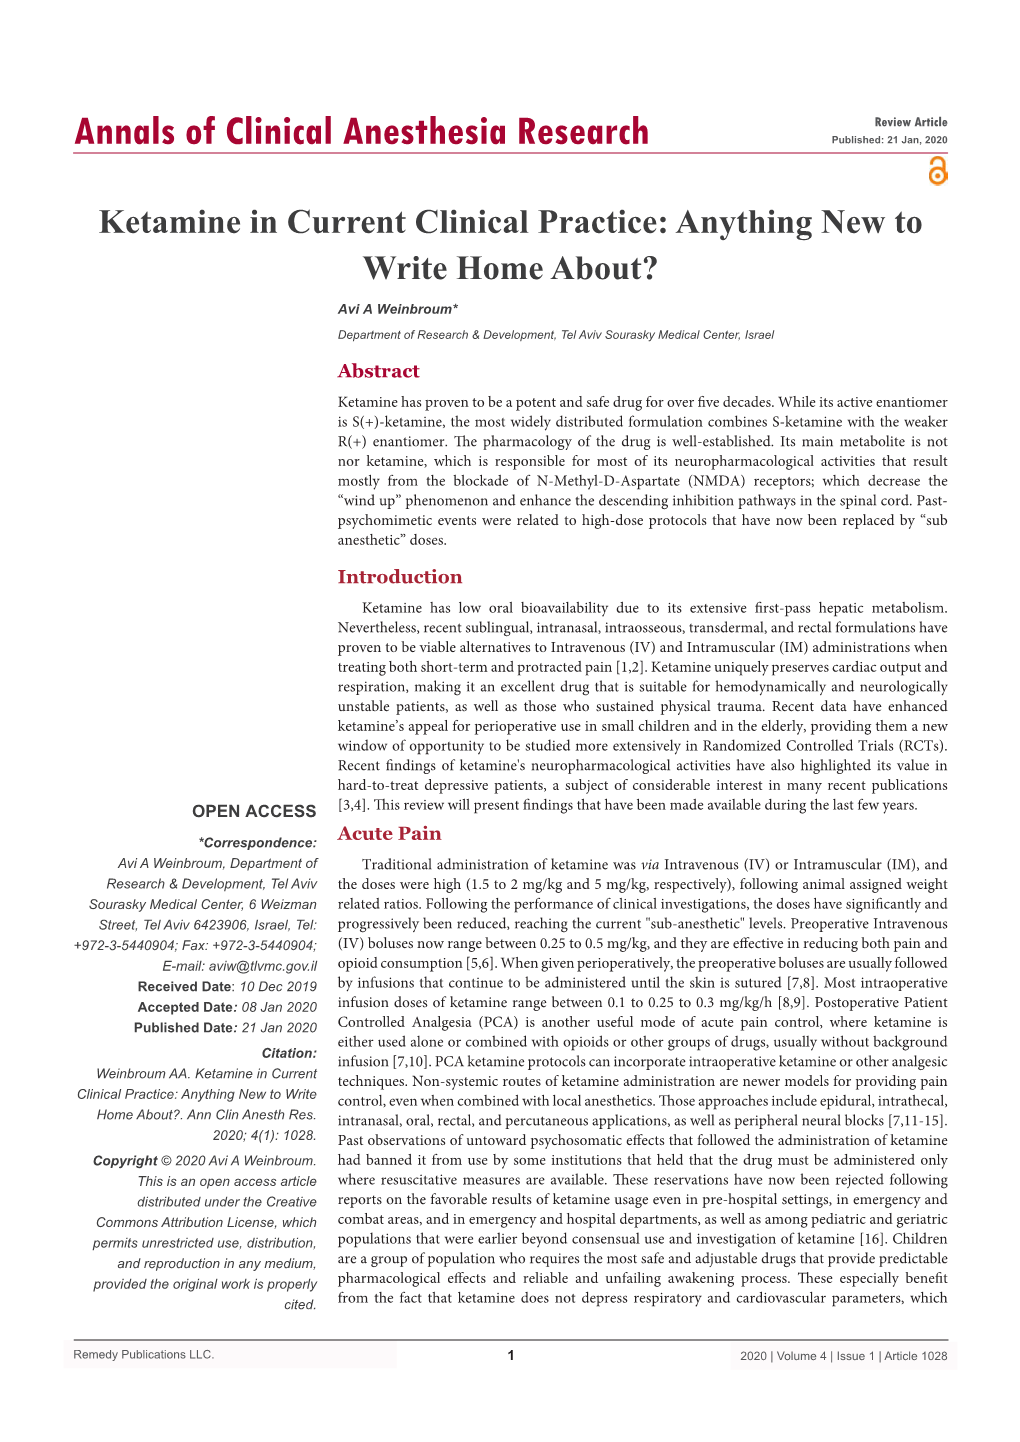 Ketamine in Current Clinical Practice: Anything New to Write Home About?